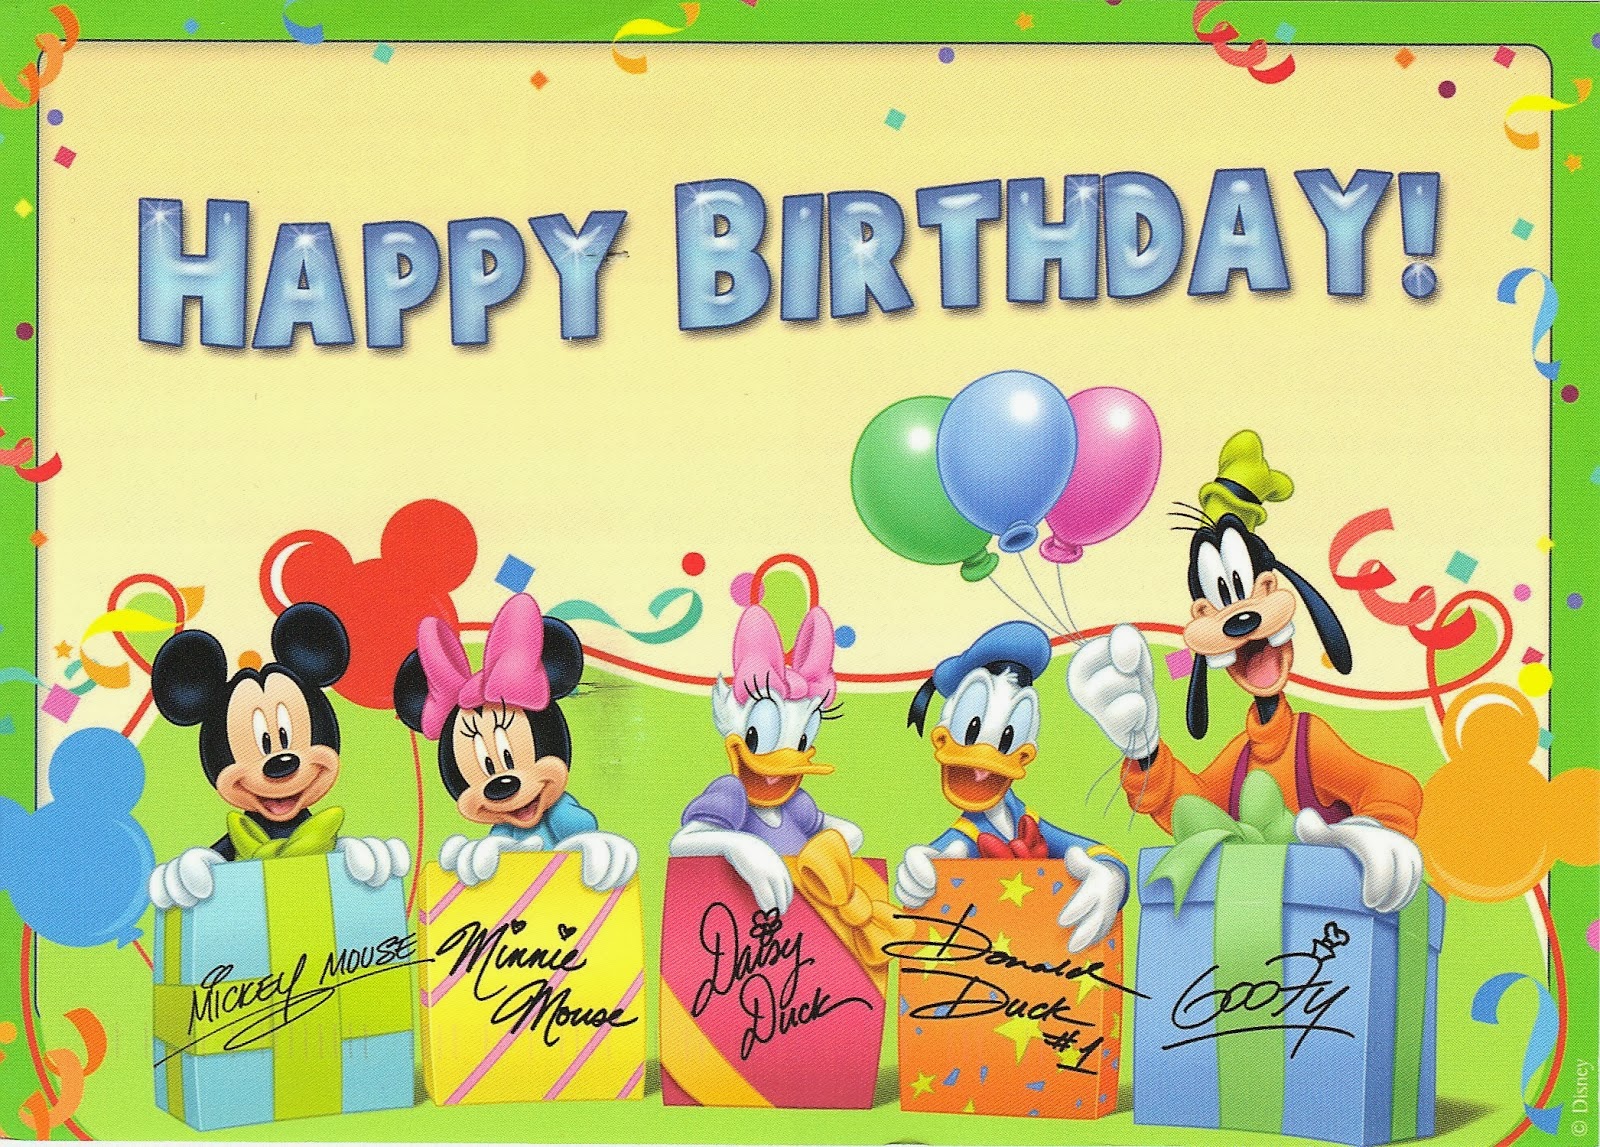 Ideas Disney: °O° Happy Birthday to the Happiest Place on Earth! °O°